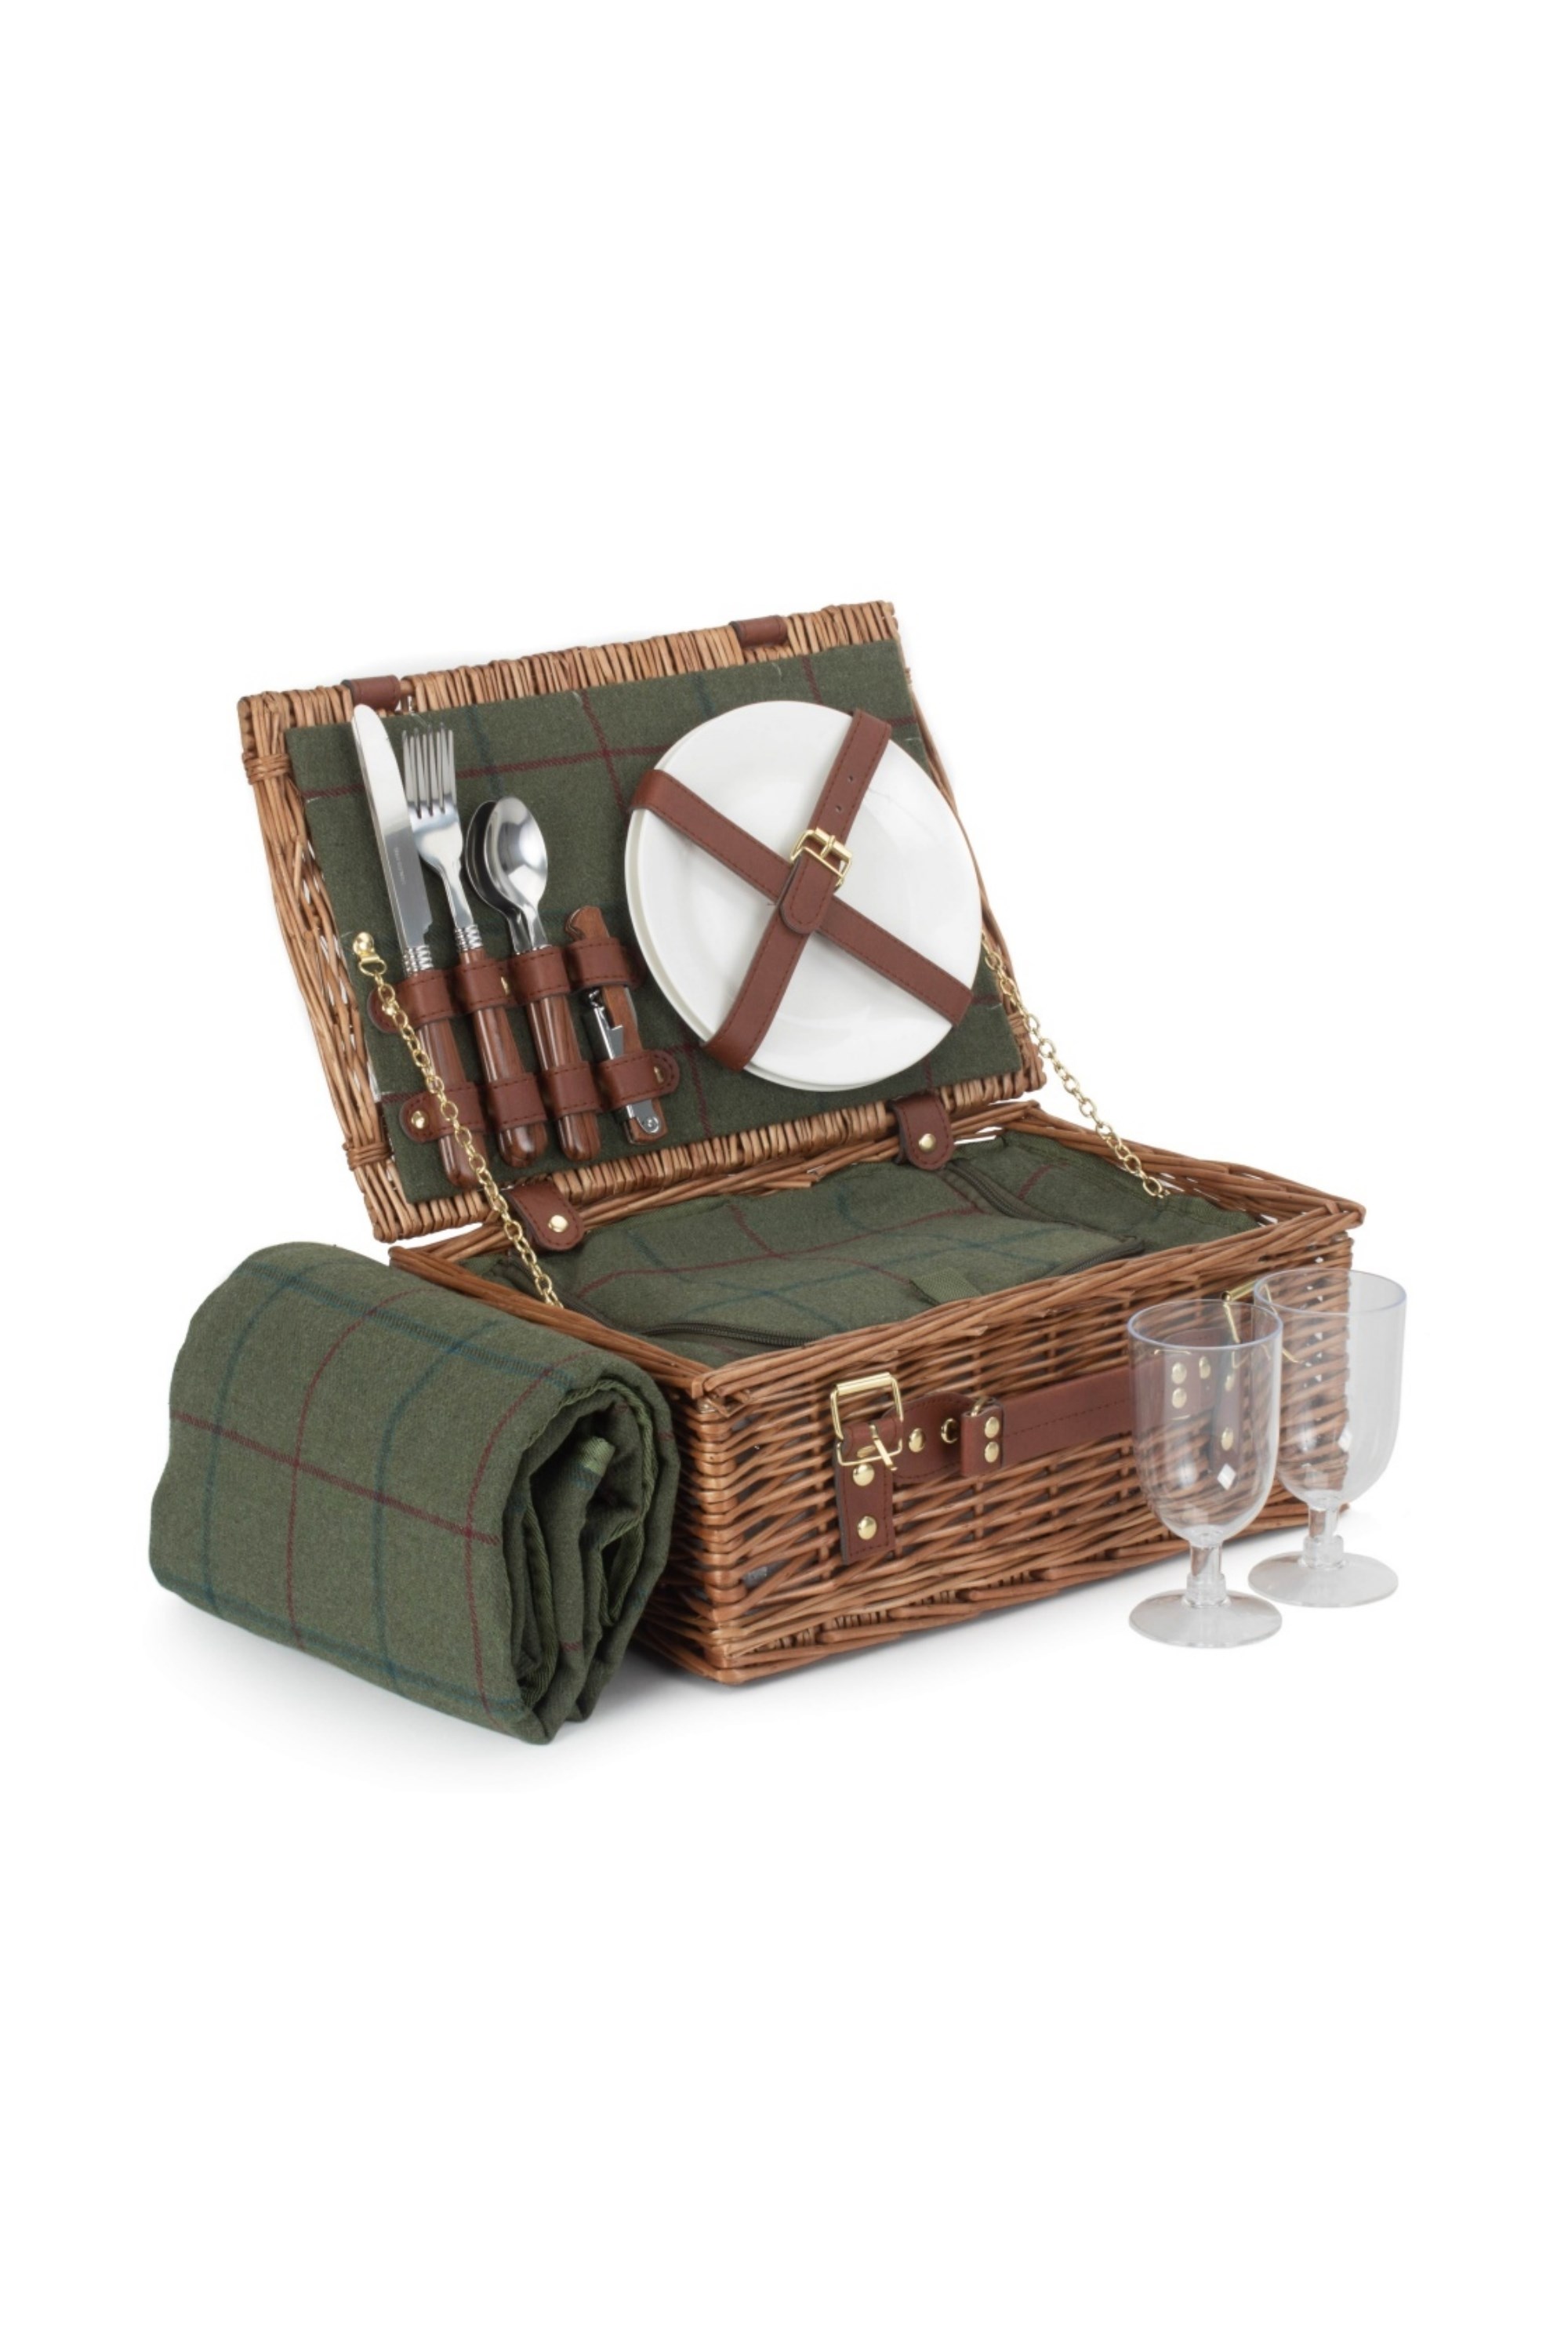 Wicker 2 Person Green Tweed Classic Picnic Basket -